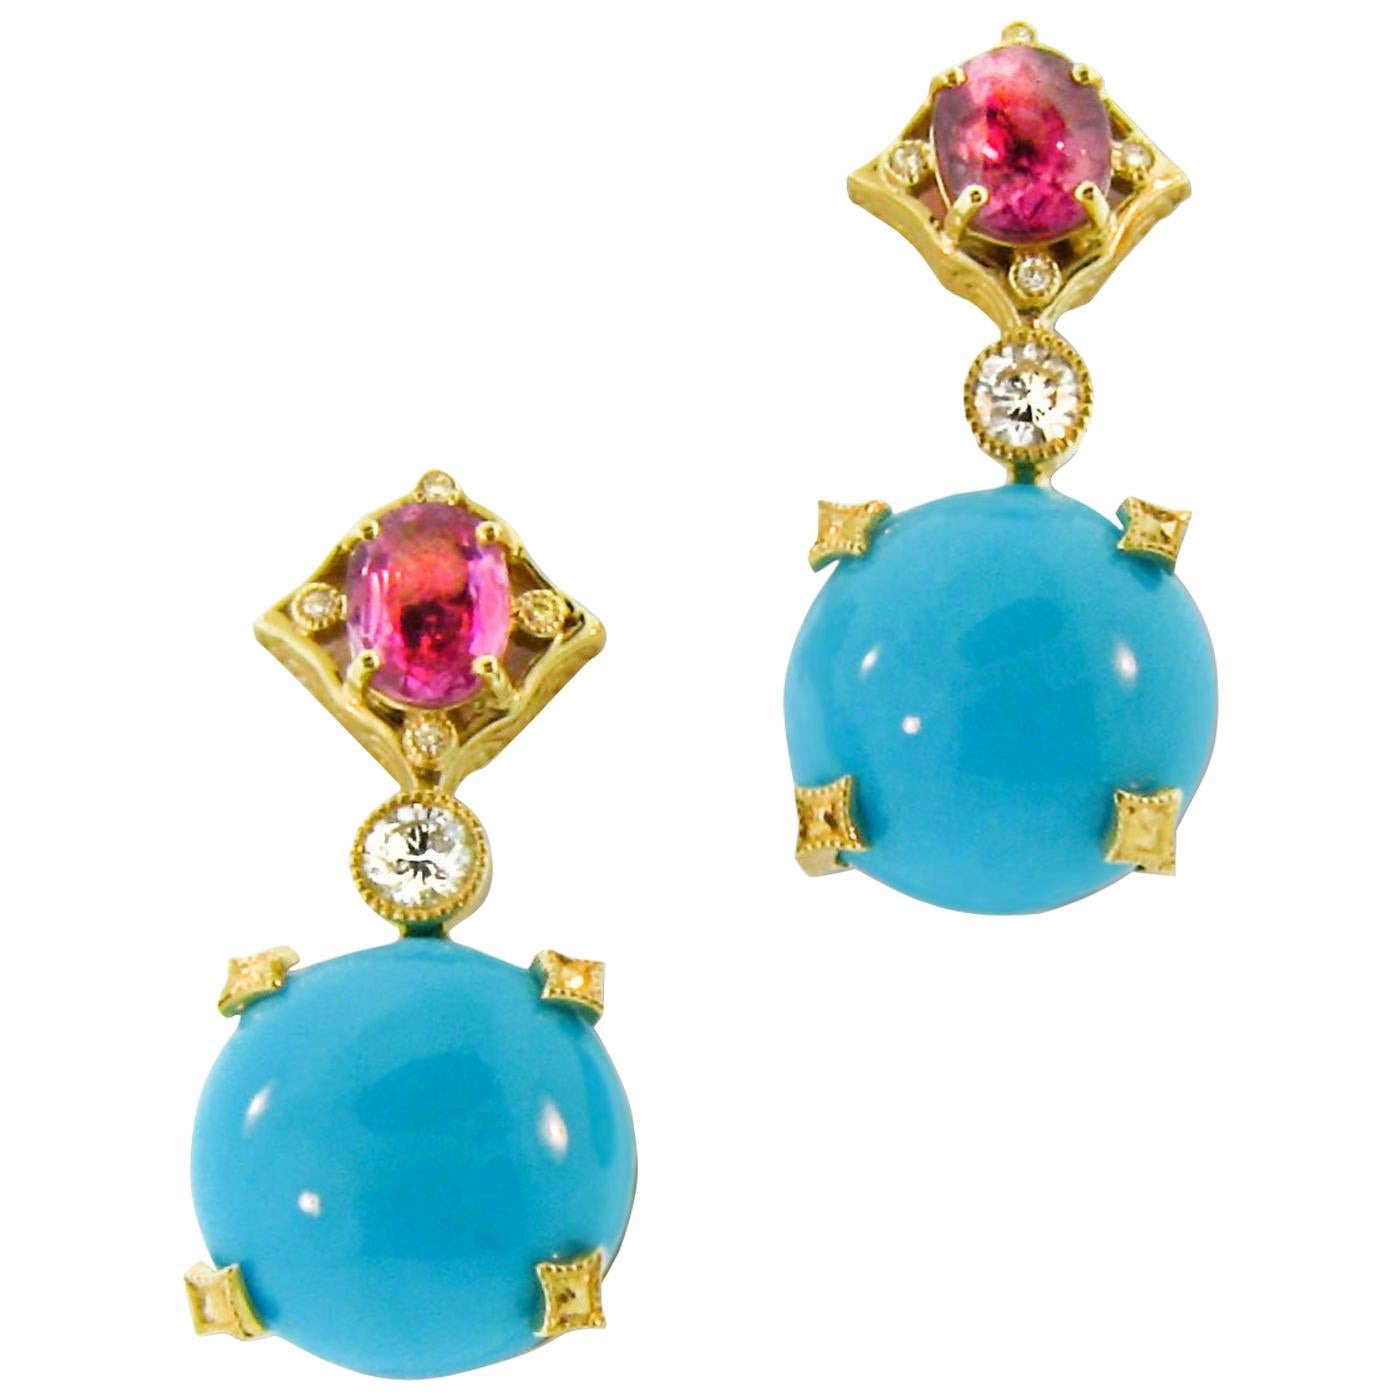 17.88 Carat Sleeping Beauty Turquoise and 2.25 Carat Pink Sapphire Earrings For Sale